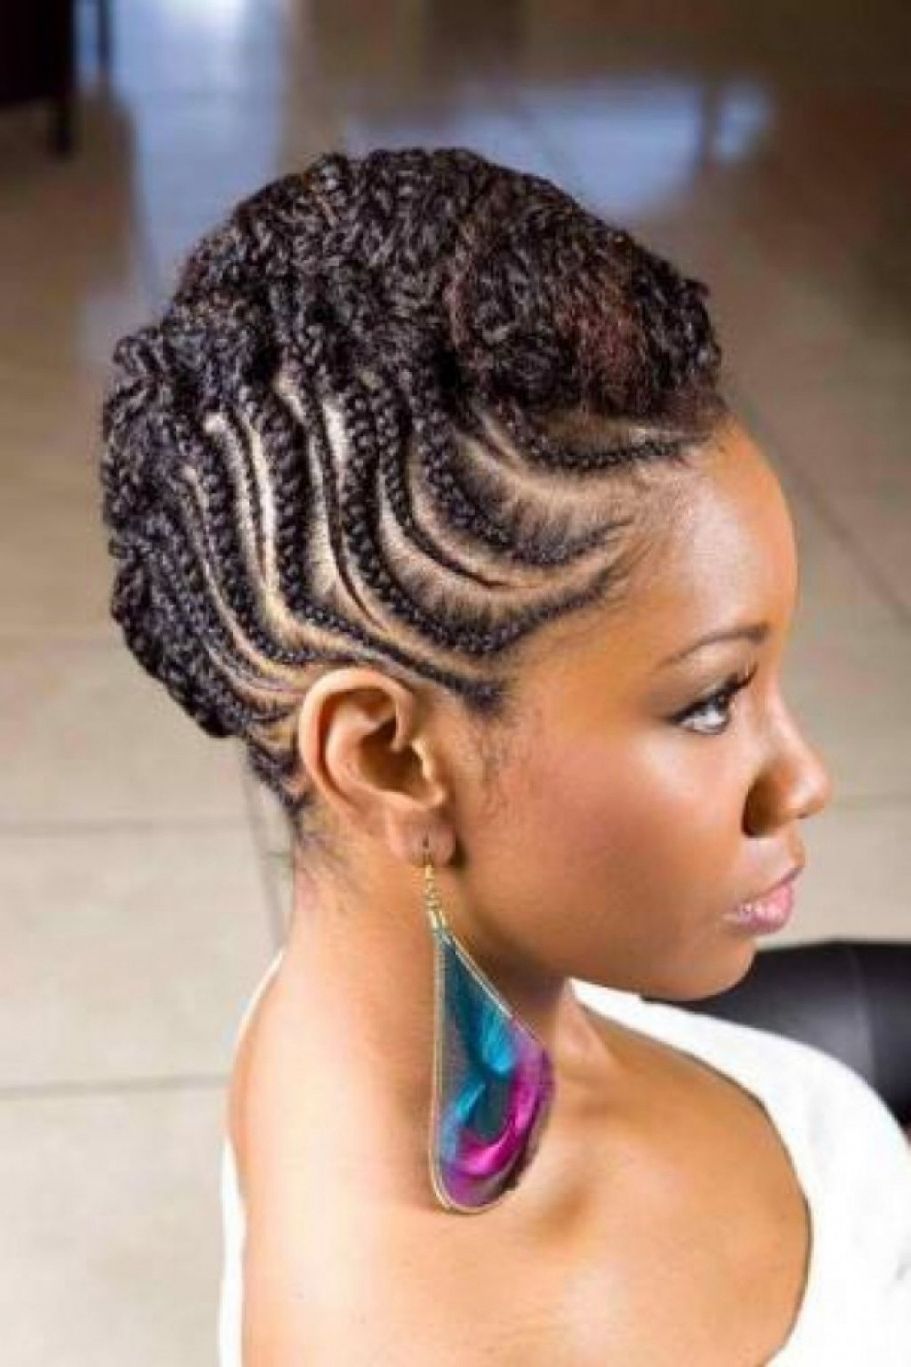 New Mohawk Braided Hairstyles 55 Inspiration With Mohawk Braided With Regard To Most Recent Chunky Mohawk Braids Hairstyles (View 10 of 15)